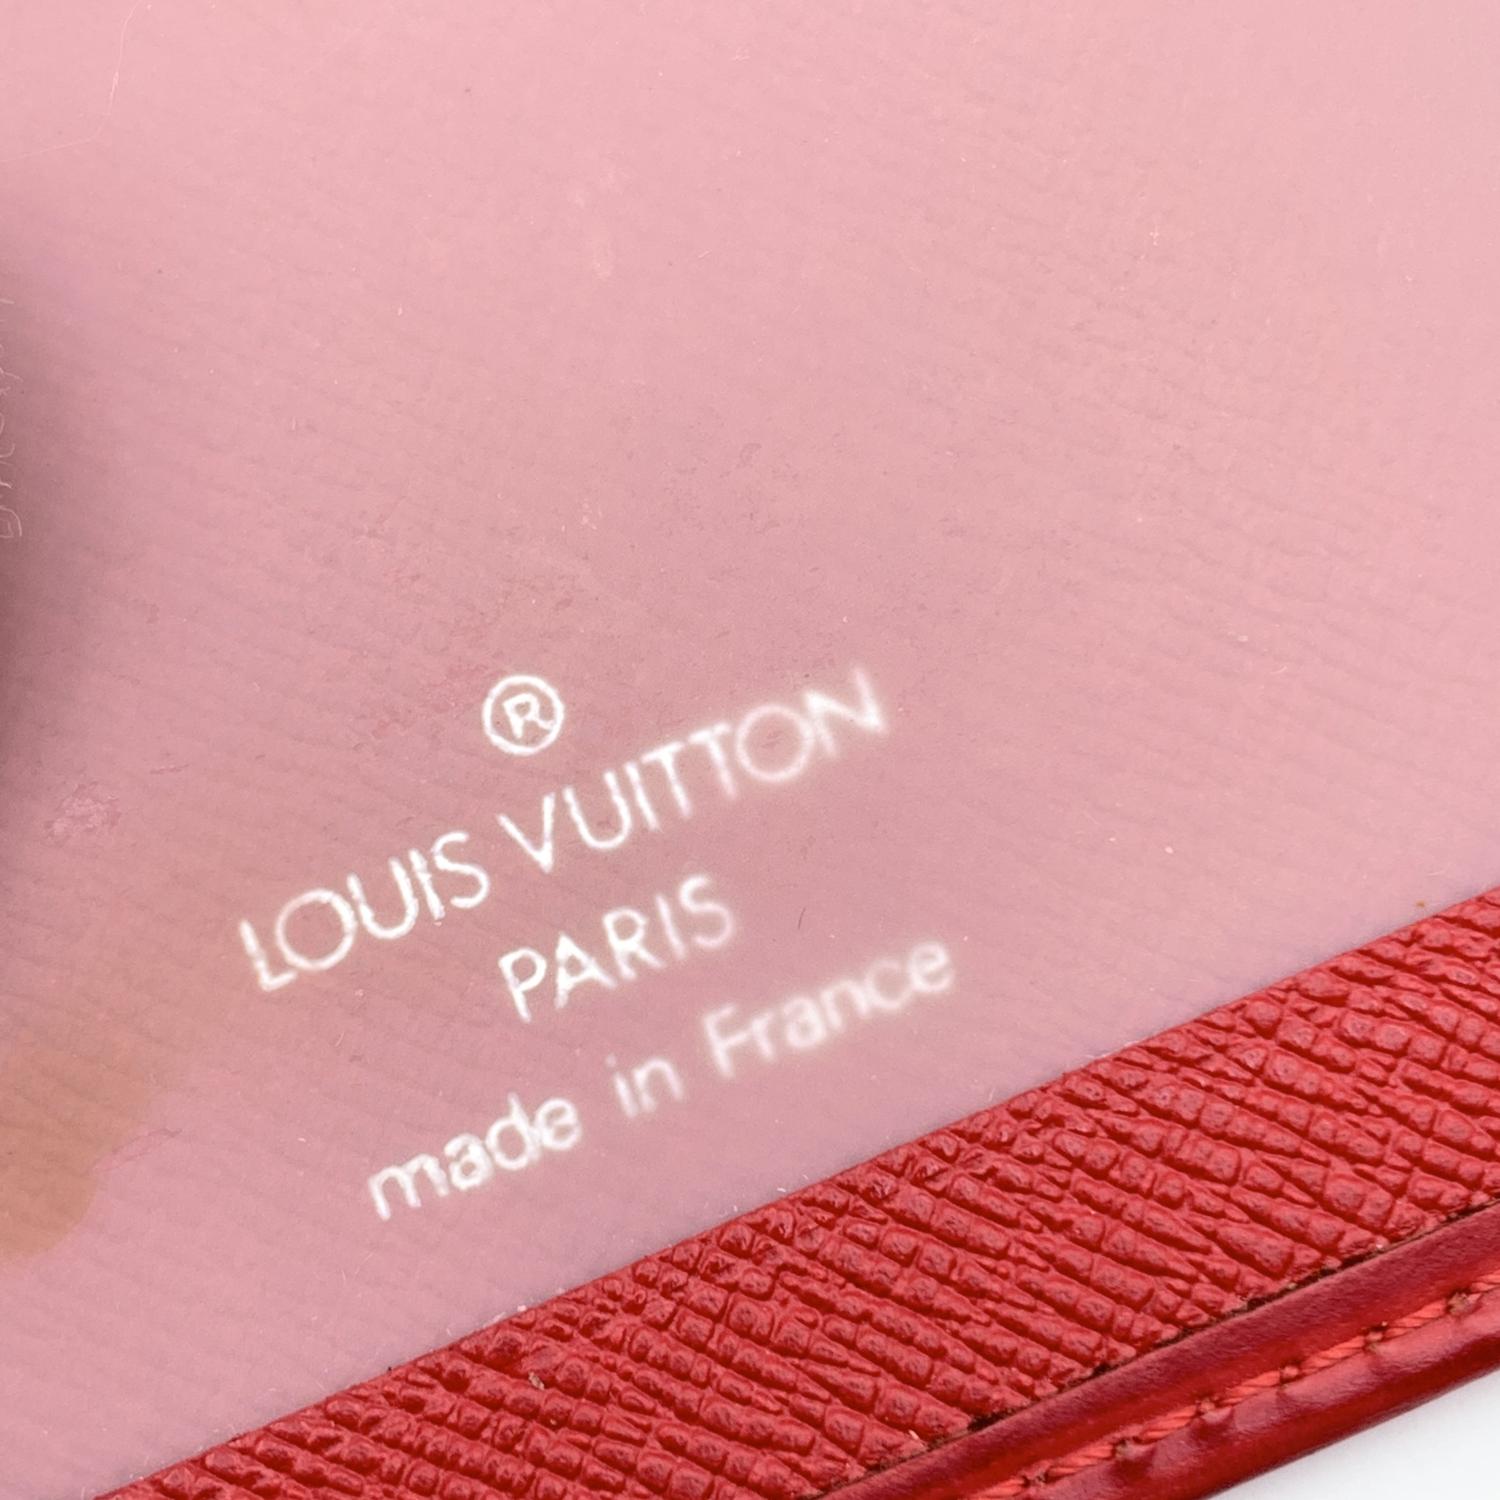 Louis Vuitton Porte 2 card case in Red Epi leather. Inside has two slip pockets with plastic windows. It is perfect for holding credit cards, ID documents, badges and pass. Louis Vuitton Paris - Made in France' embossed inside. Data code SP0016